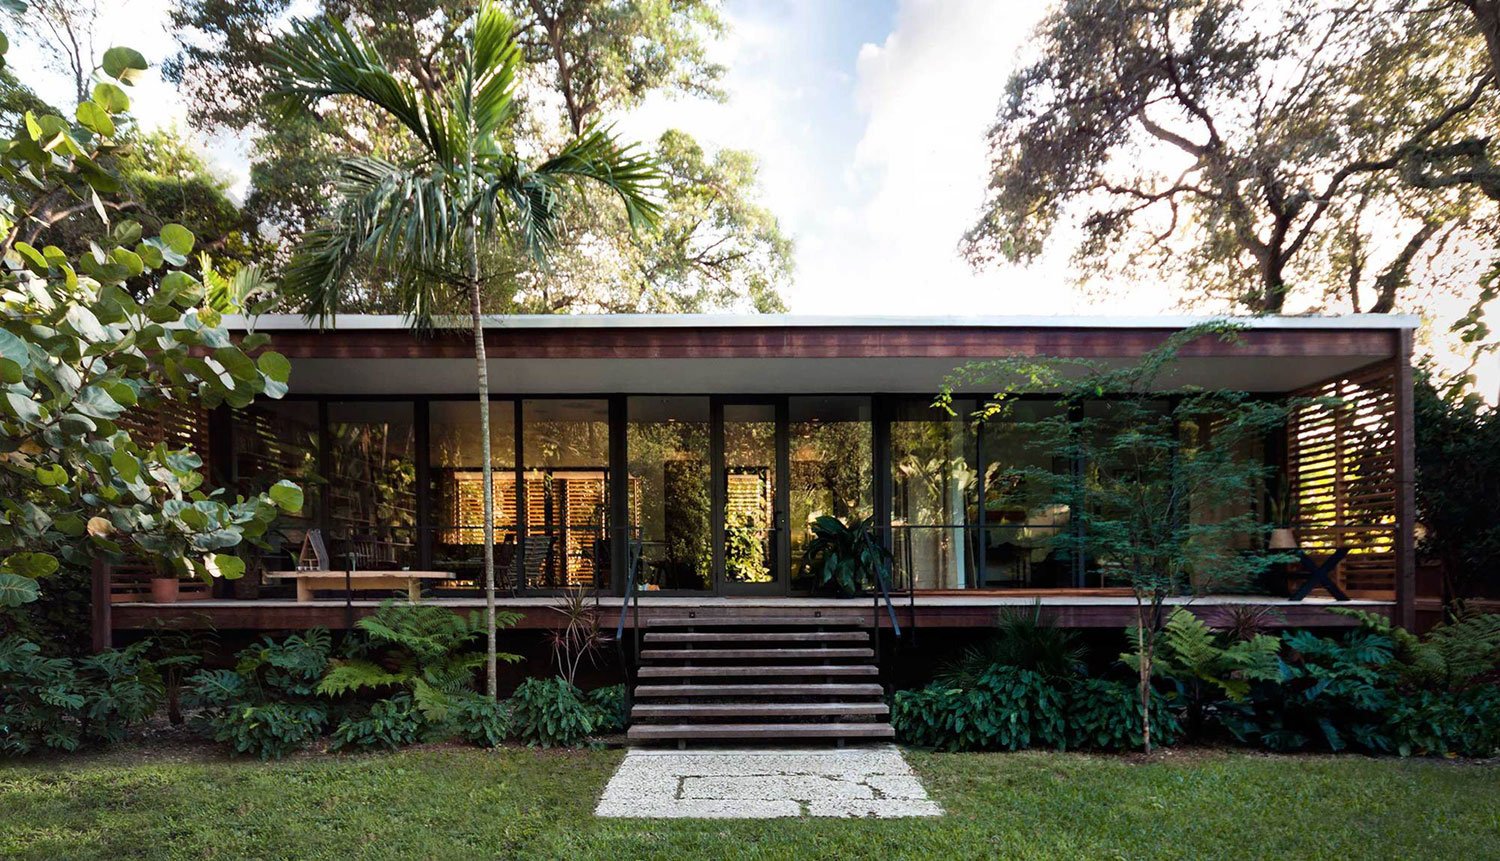 Wooden Tropical Brillhart House Located in Miami by Brillhart Architecture-11